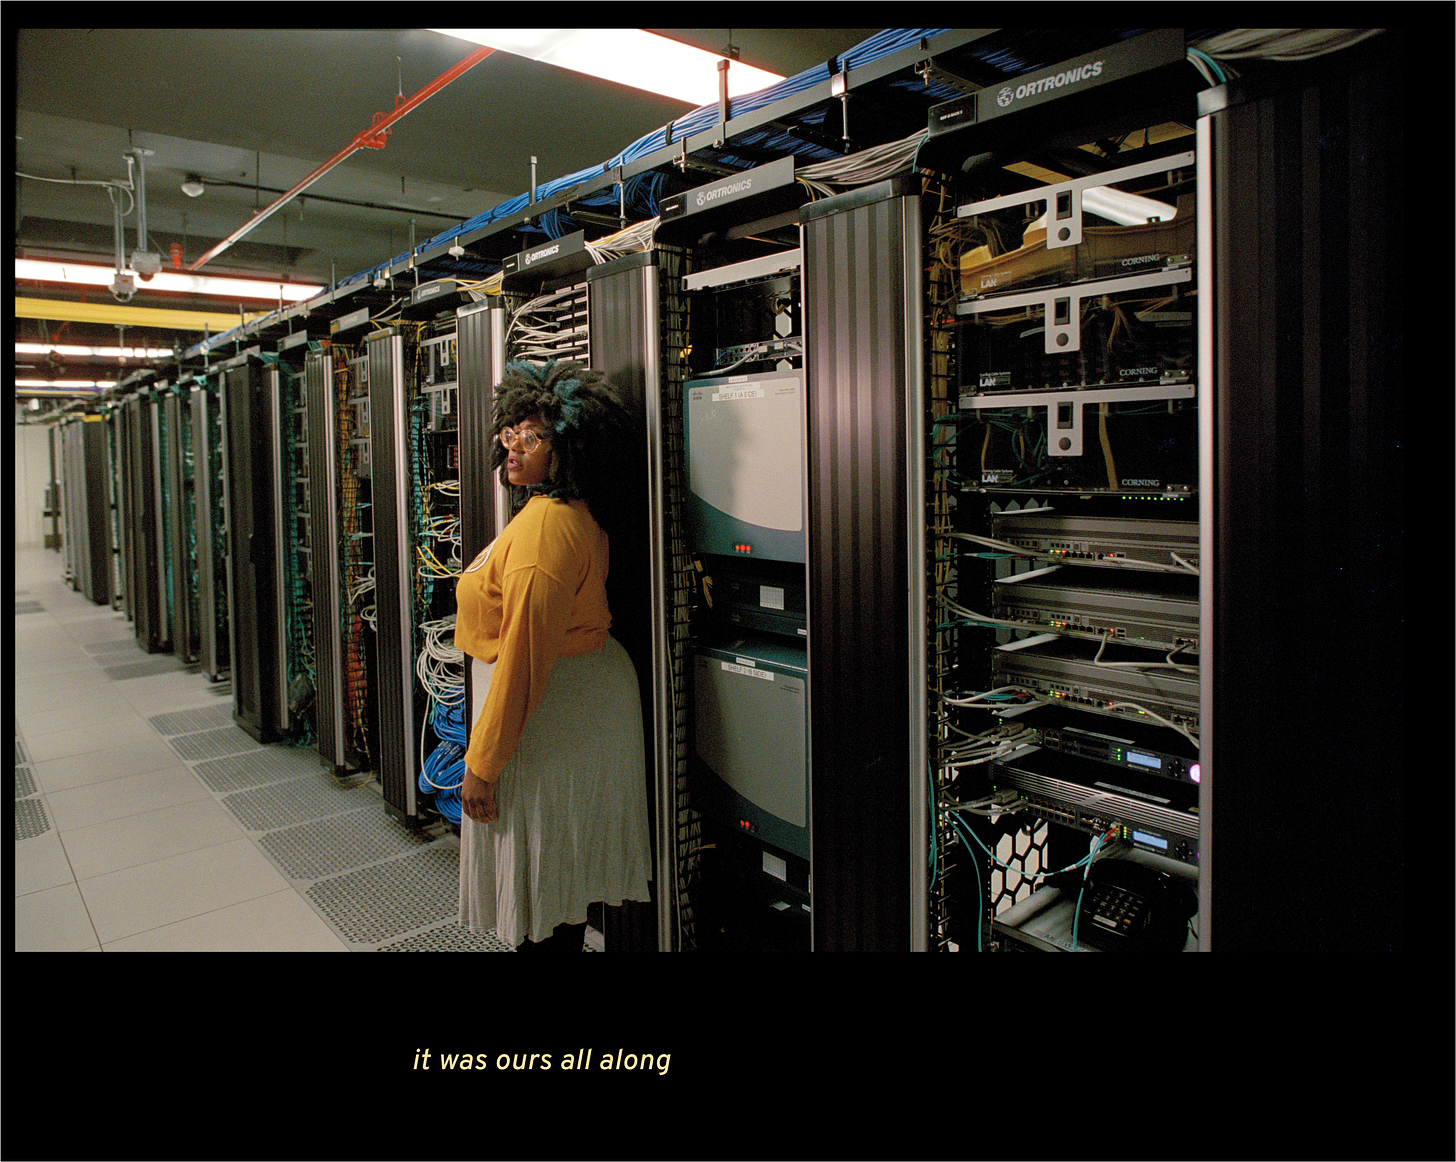 Image of a Black woman standing in a data center, in front of a wall of cables and servers. She wears a yellow shirt, big afro, and looks into the distance.